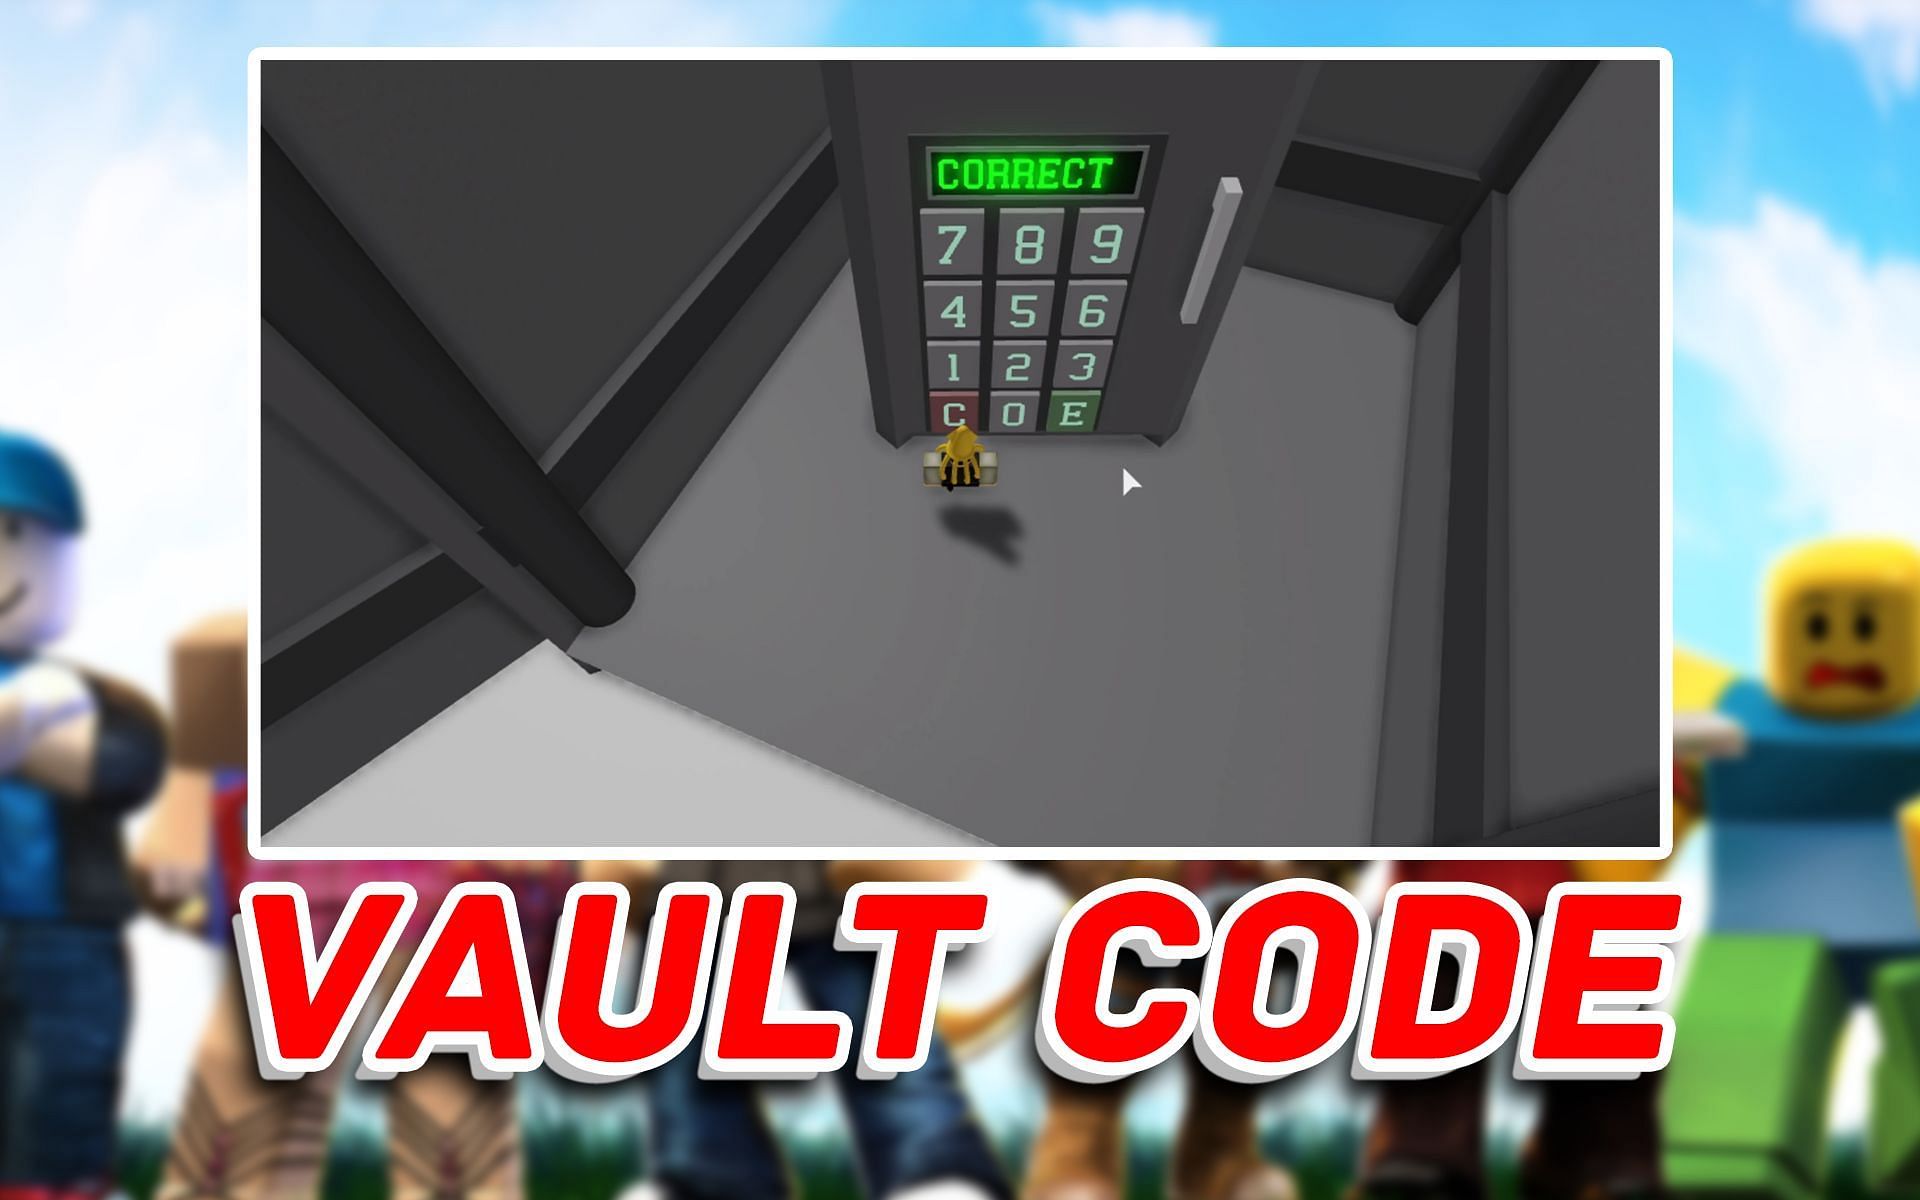 Players will need to possess these Vault Codes if they want to progress in Tower of Hell (Image via Garena)